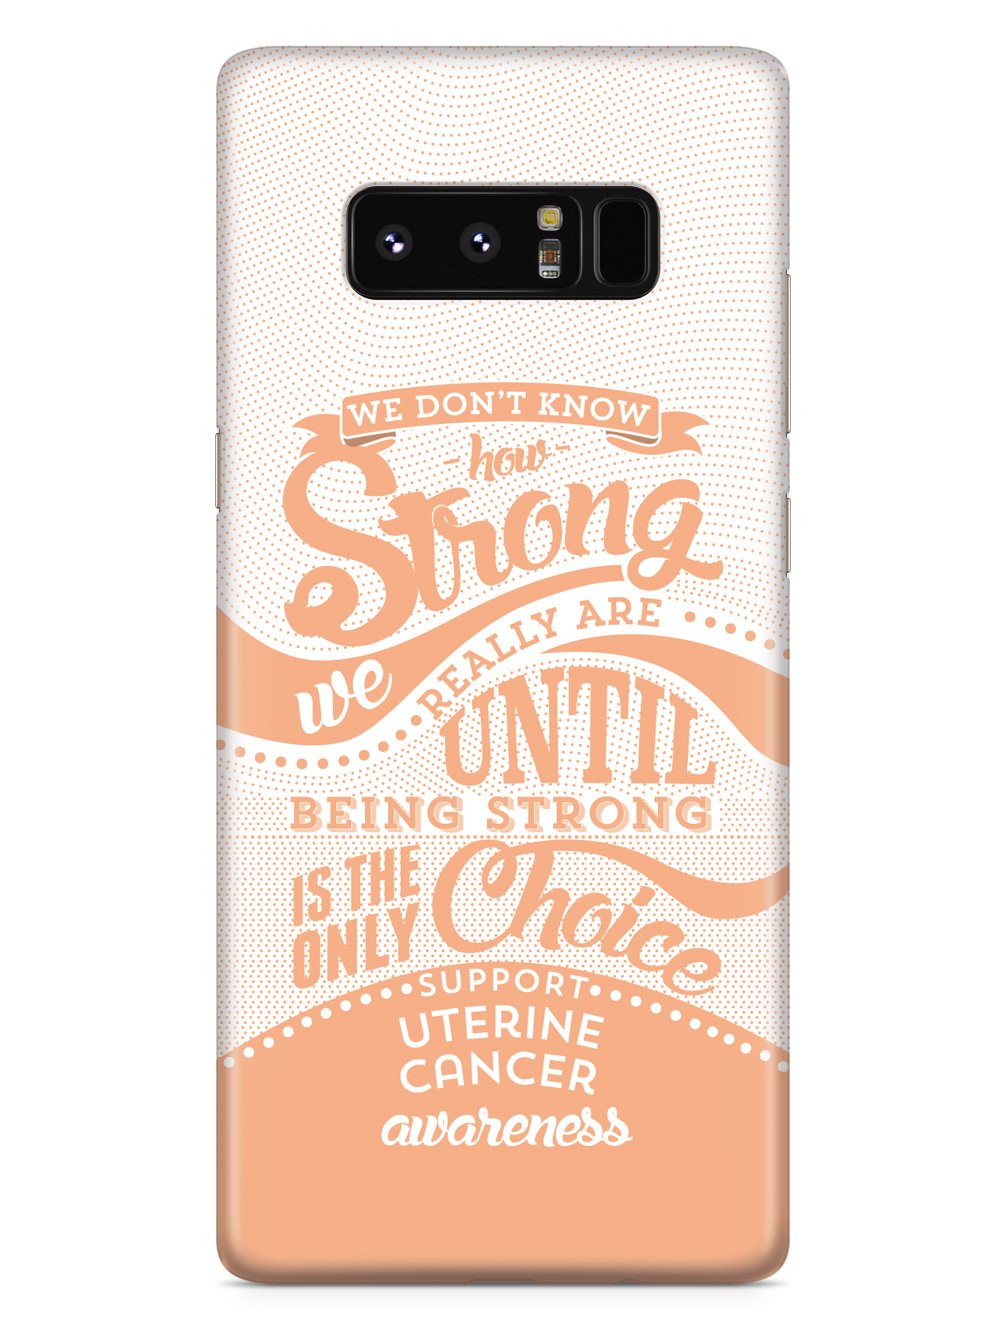 How Strong - Uterine Cancer Awareness Case